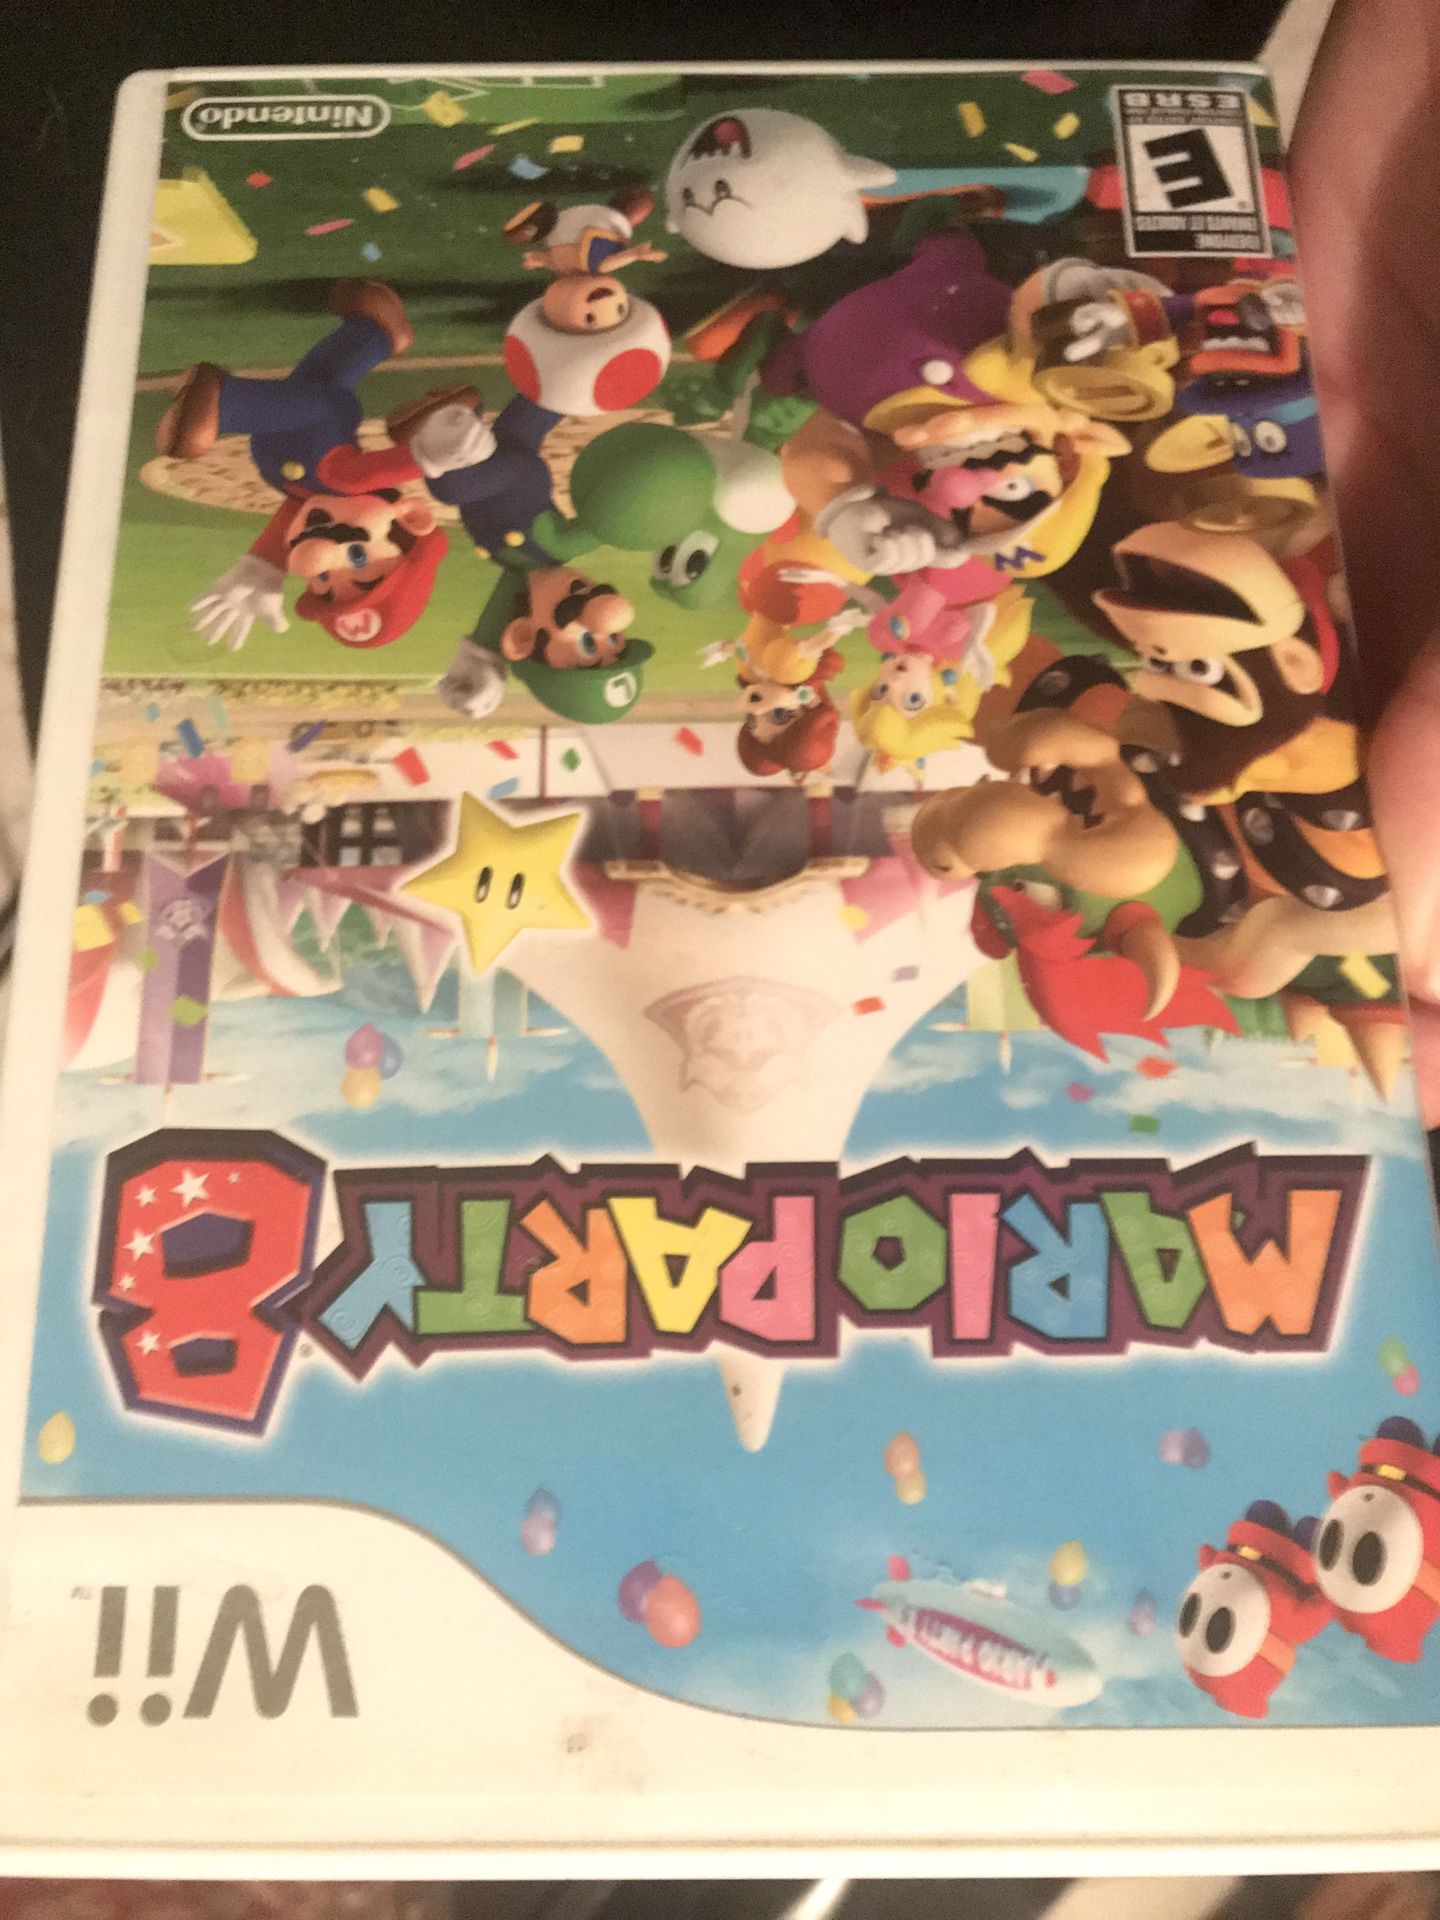 Mario party 8 for wii